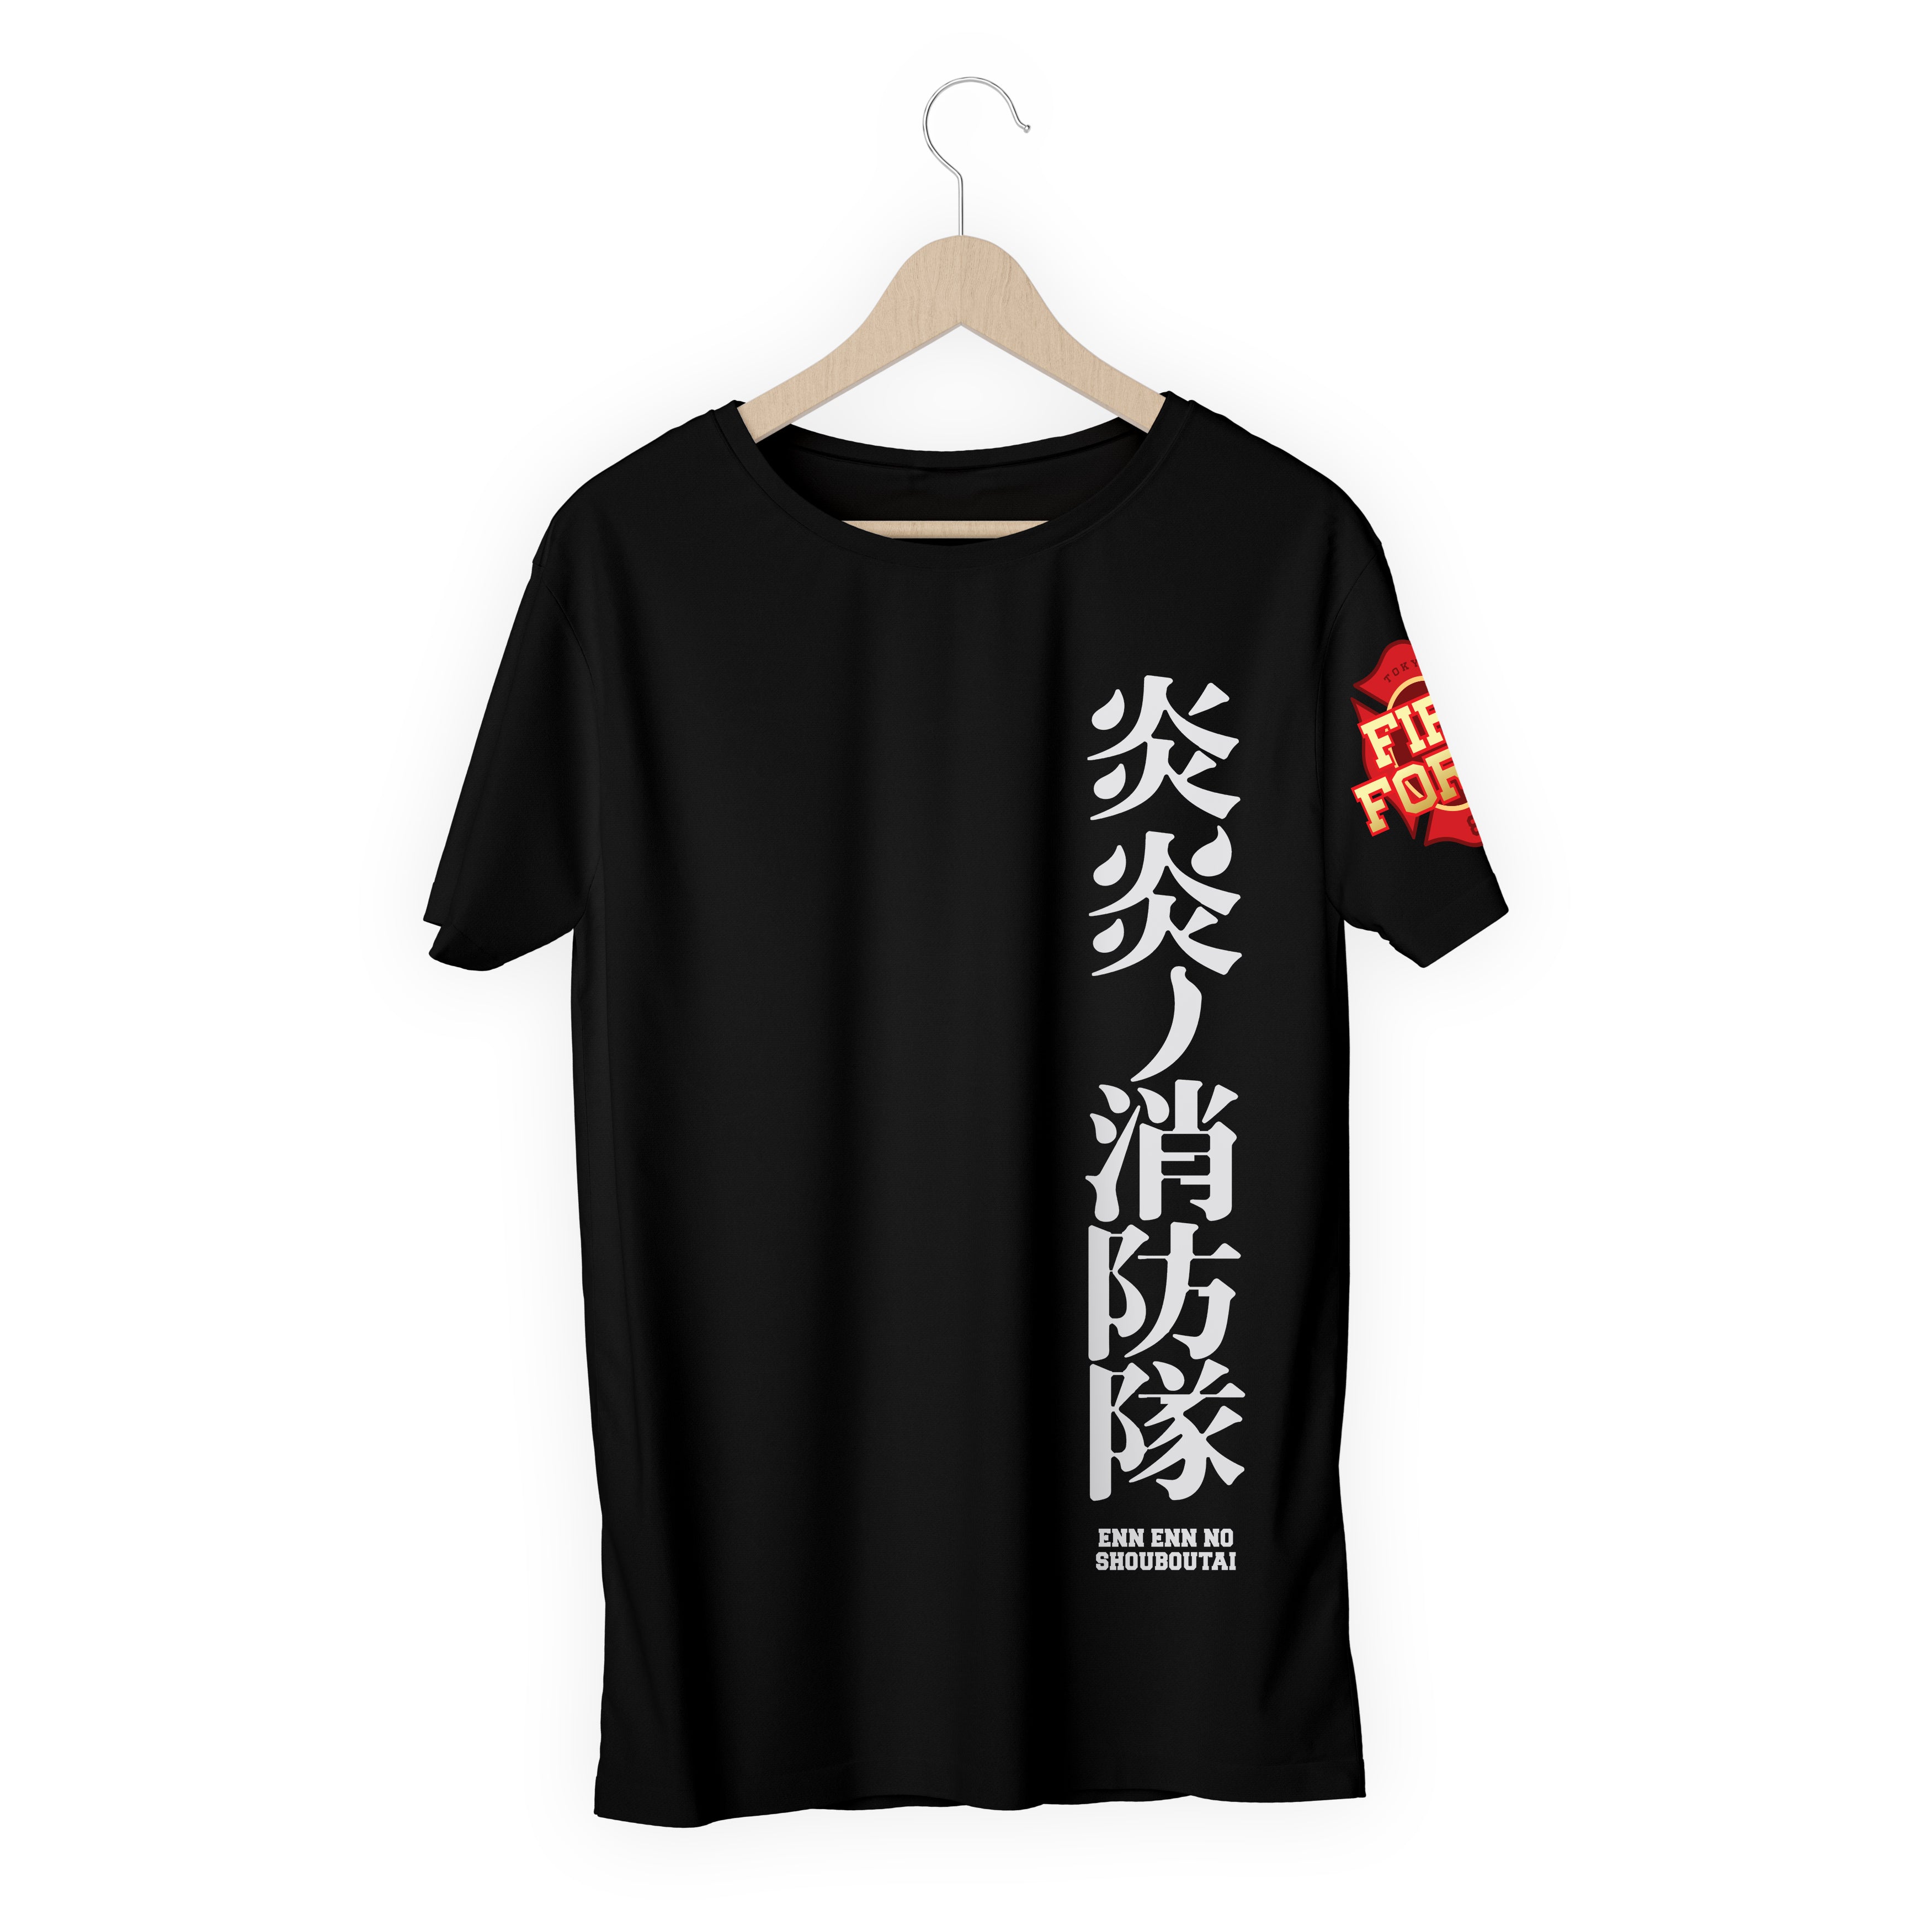 Fire Force - FunimationCon 2020 T-Shirt image count 1